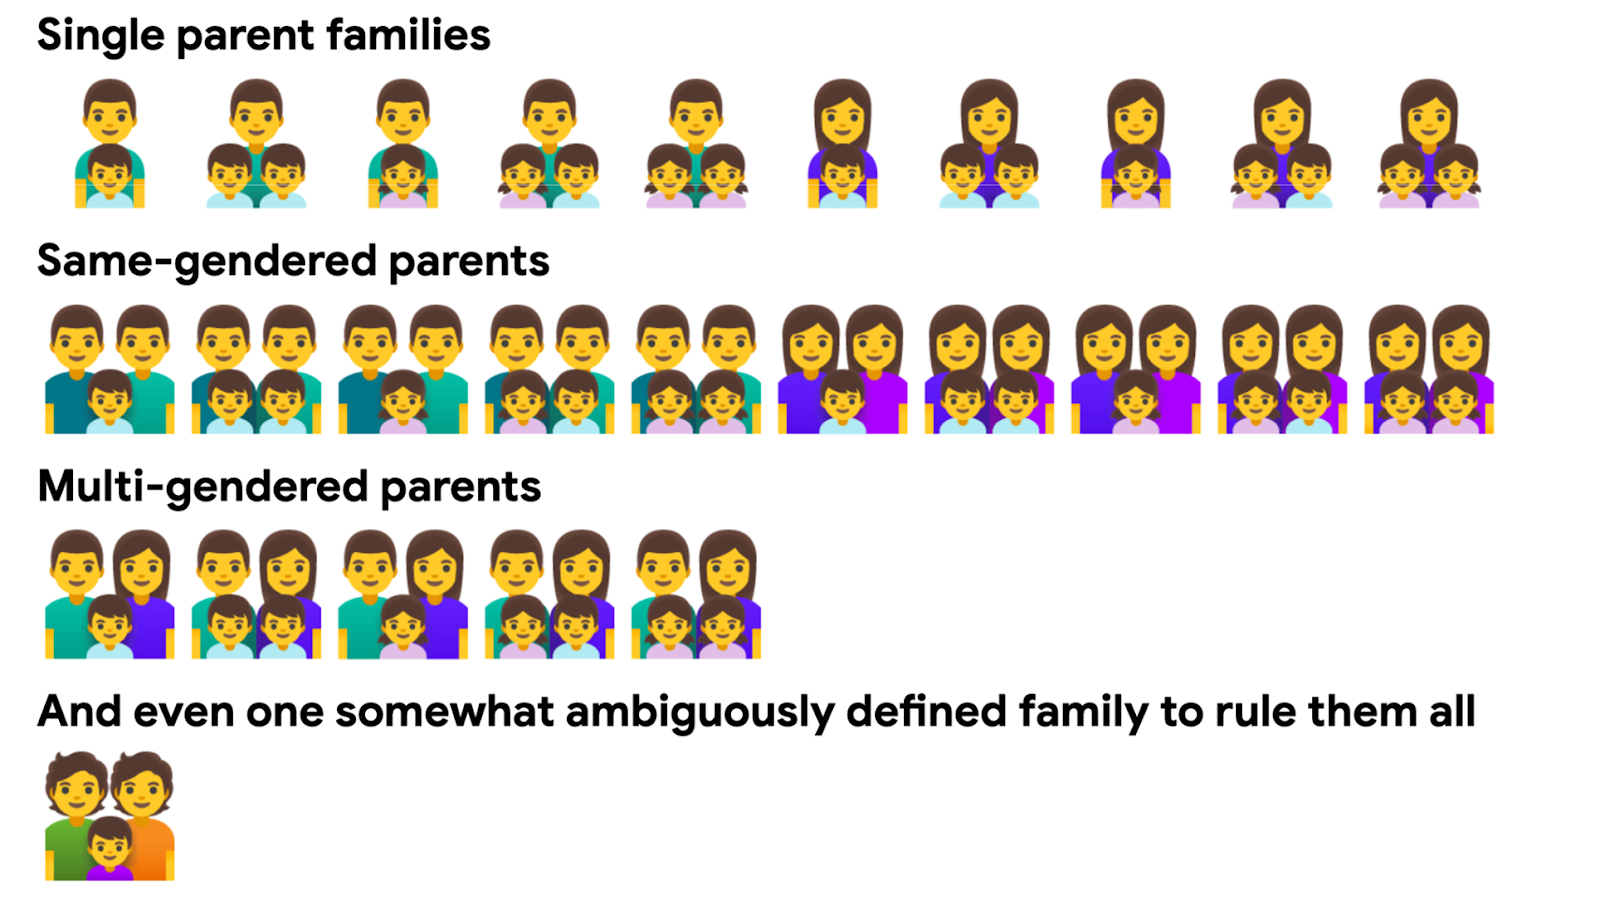 Families image